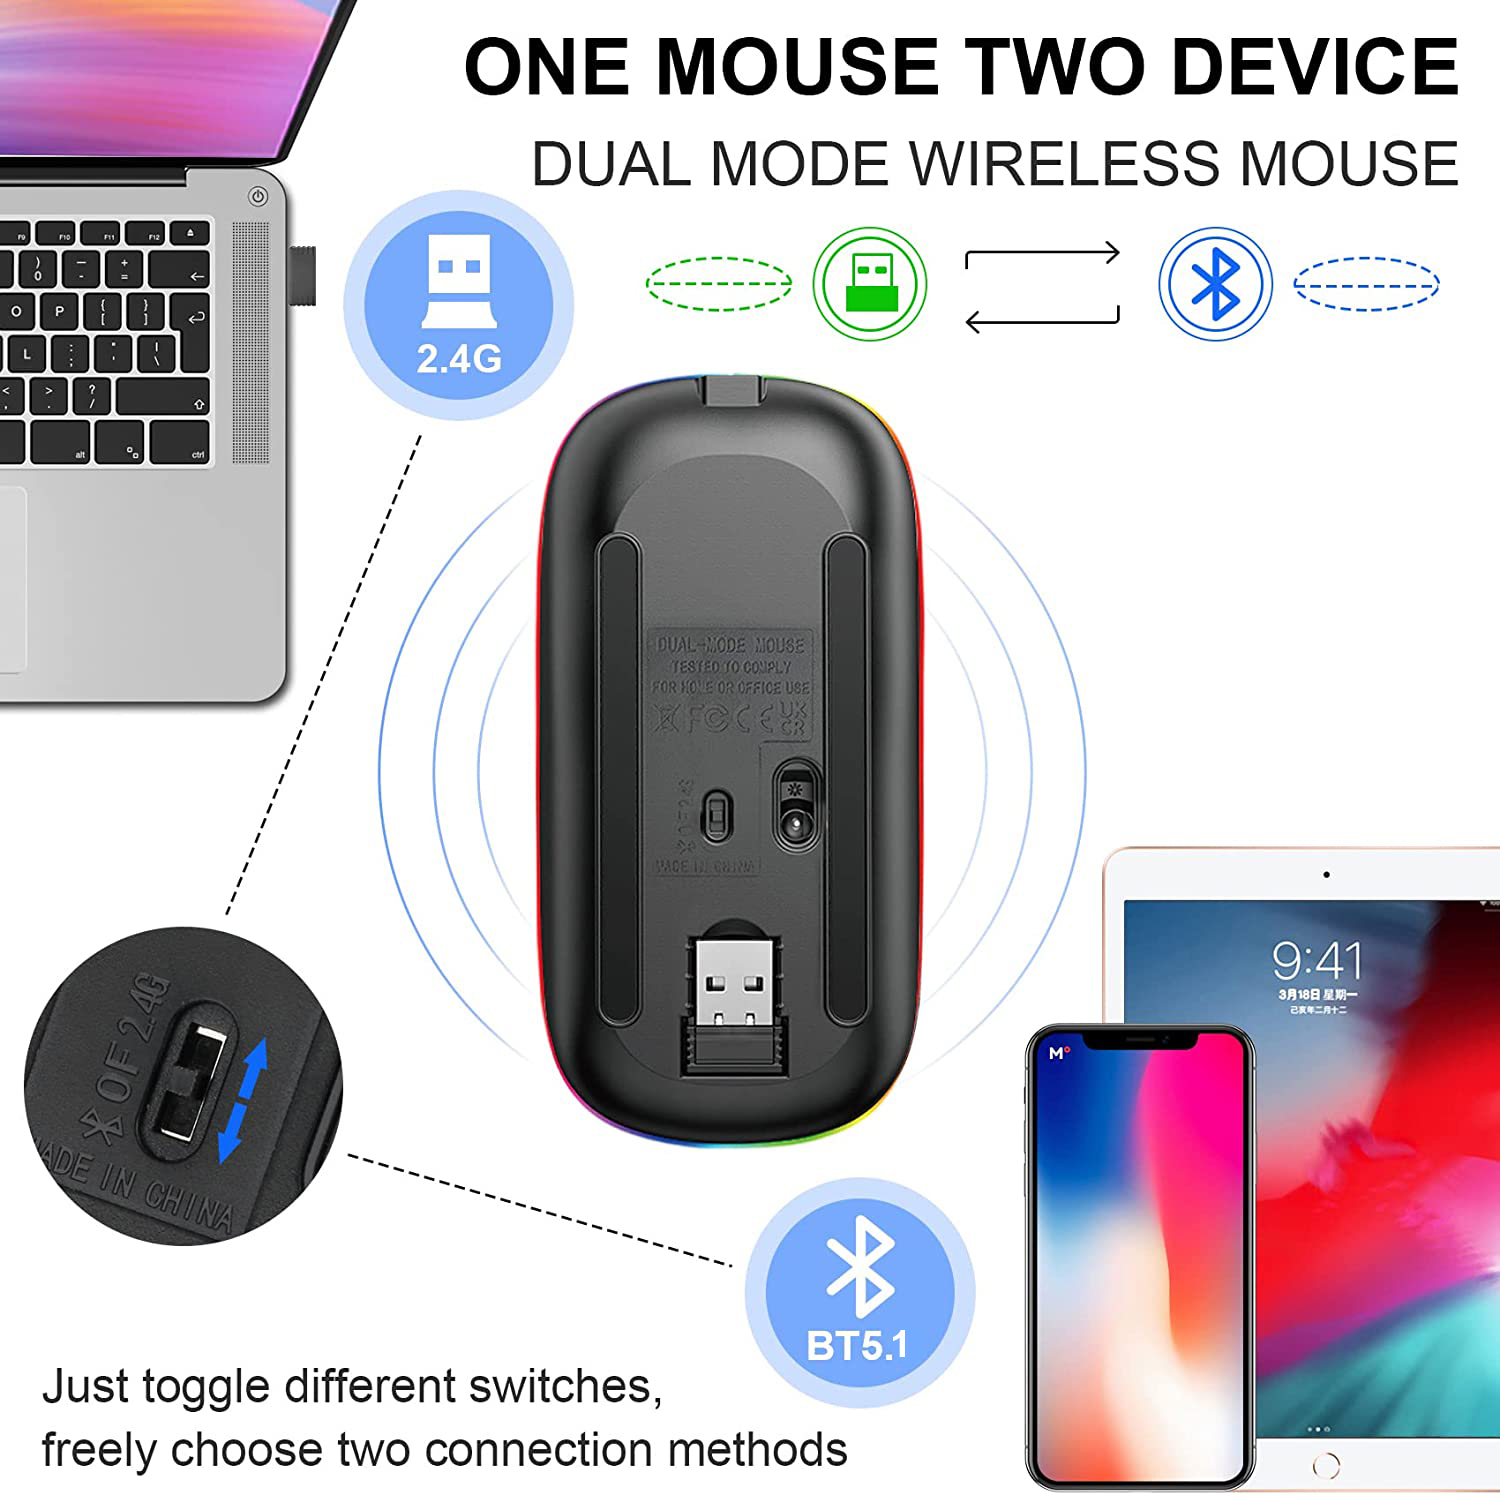 LED-Wireless-Mouse-Bluetooth-Mouse-Rechargeable-Silent-Mouse-USB-and-Type-C-Dual-Mode-BT-5-1-2-4G-Optical-Mouse-3-Adjustable-DPI-with-USB-Cable-23